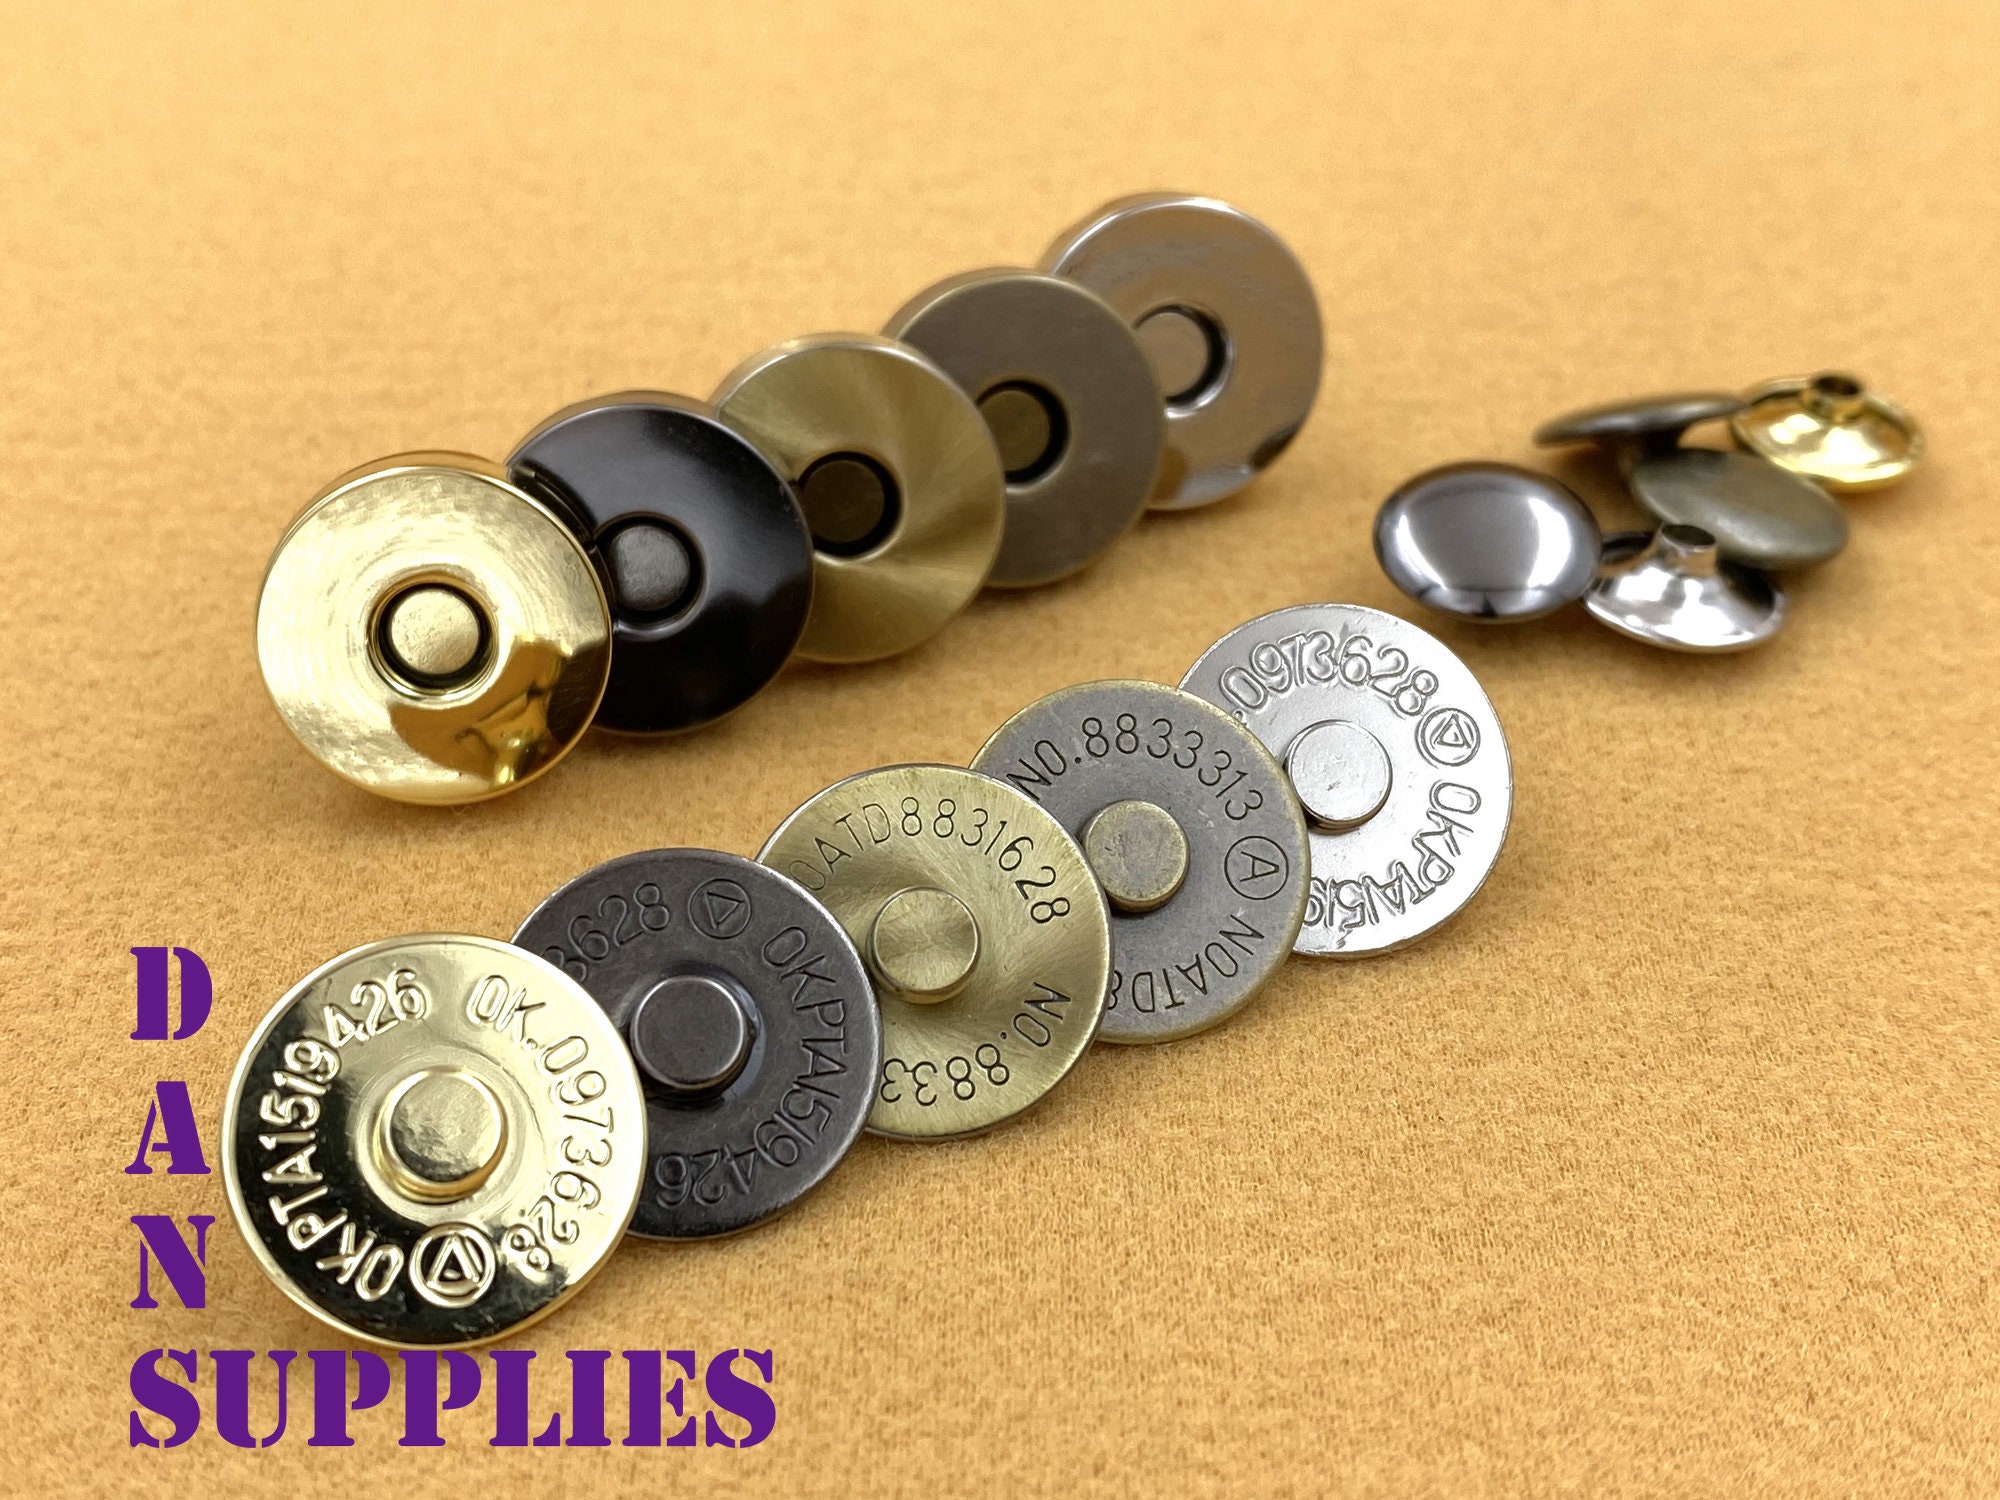 12 Sets Magnetic Buttons Button Magnets Clasps Bag Closures Fastener  Magnetic Snaps for Purses Handbag Clothing Sewing Craft, 15mm 3 Colors